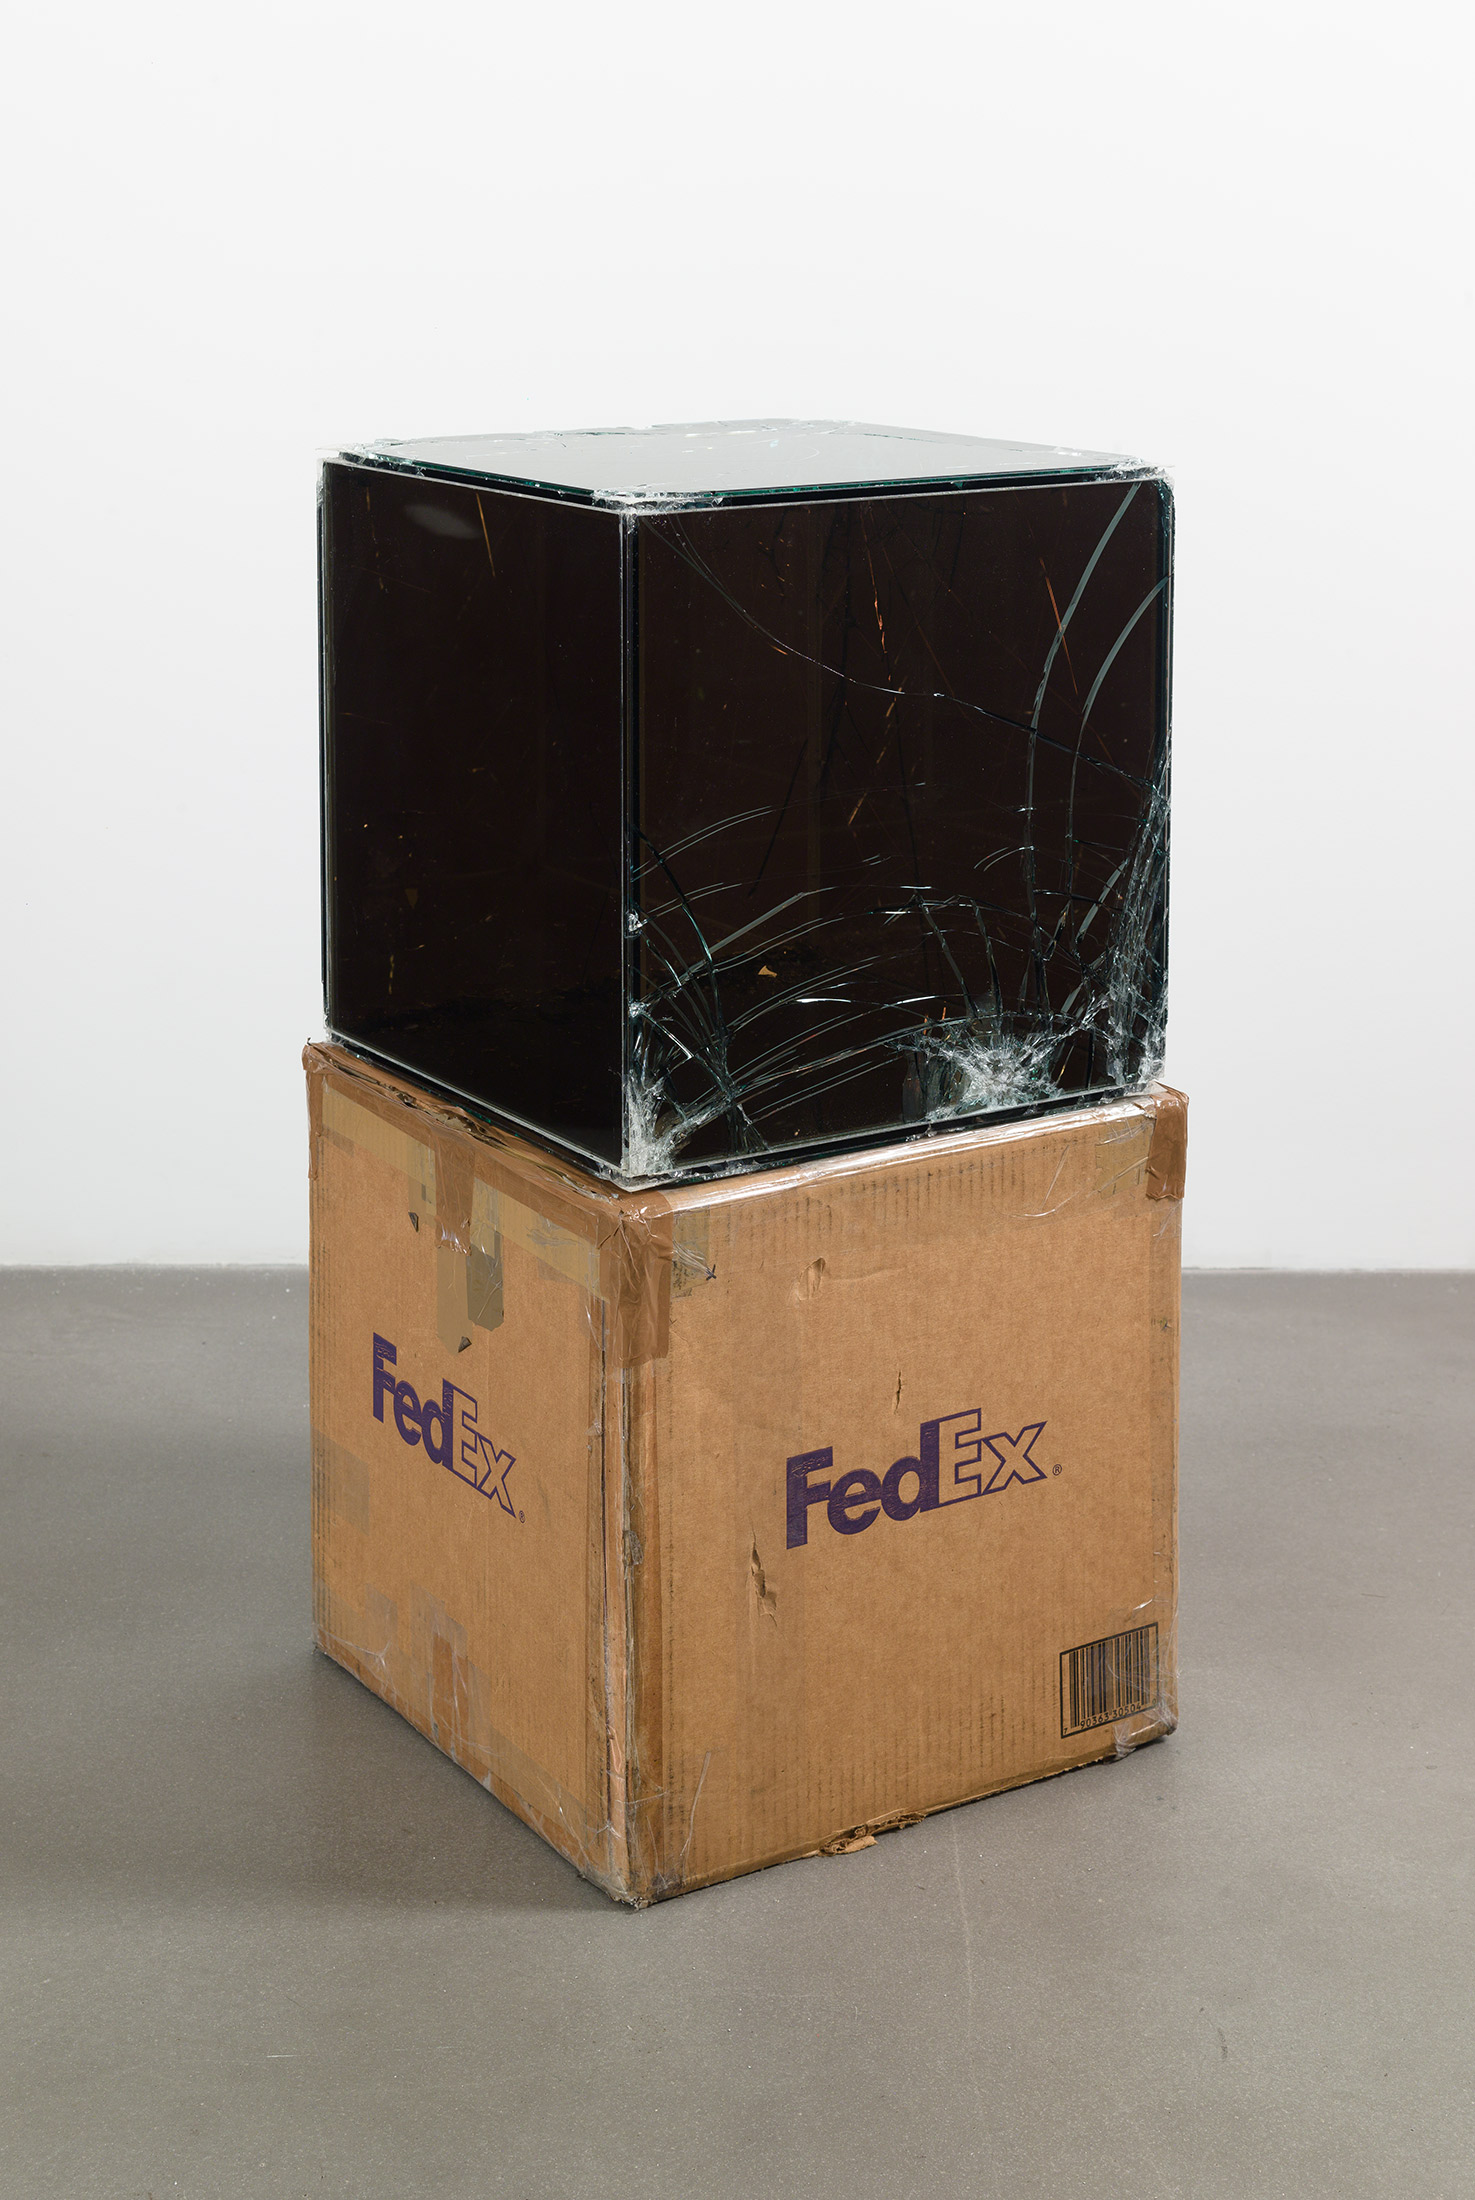 Walead Beshty Turns Shipped Glass Boxes Into Shattered Sculptures.